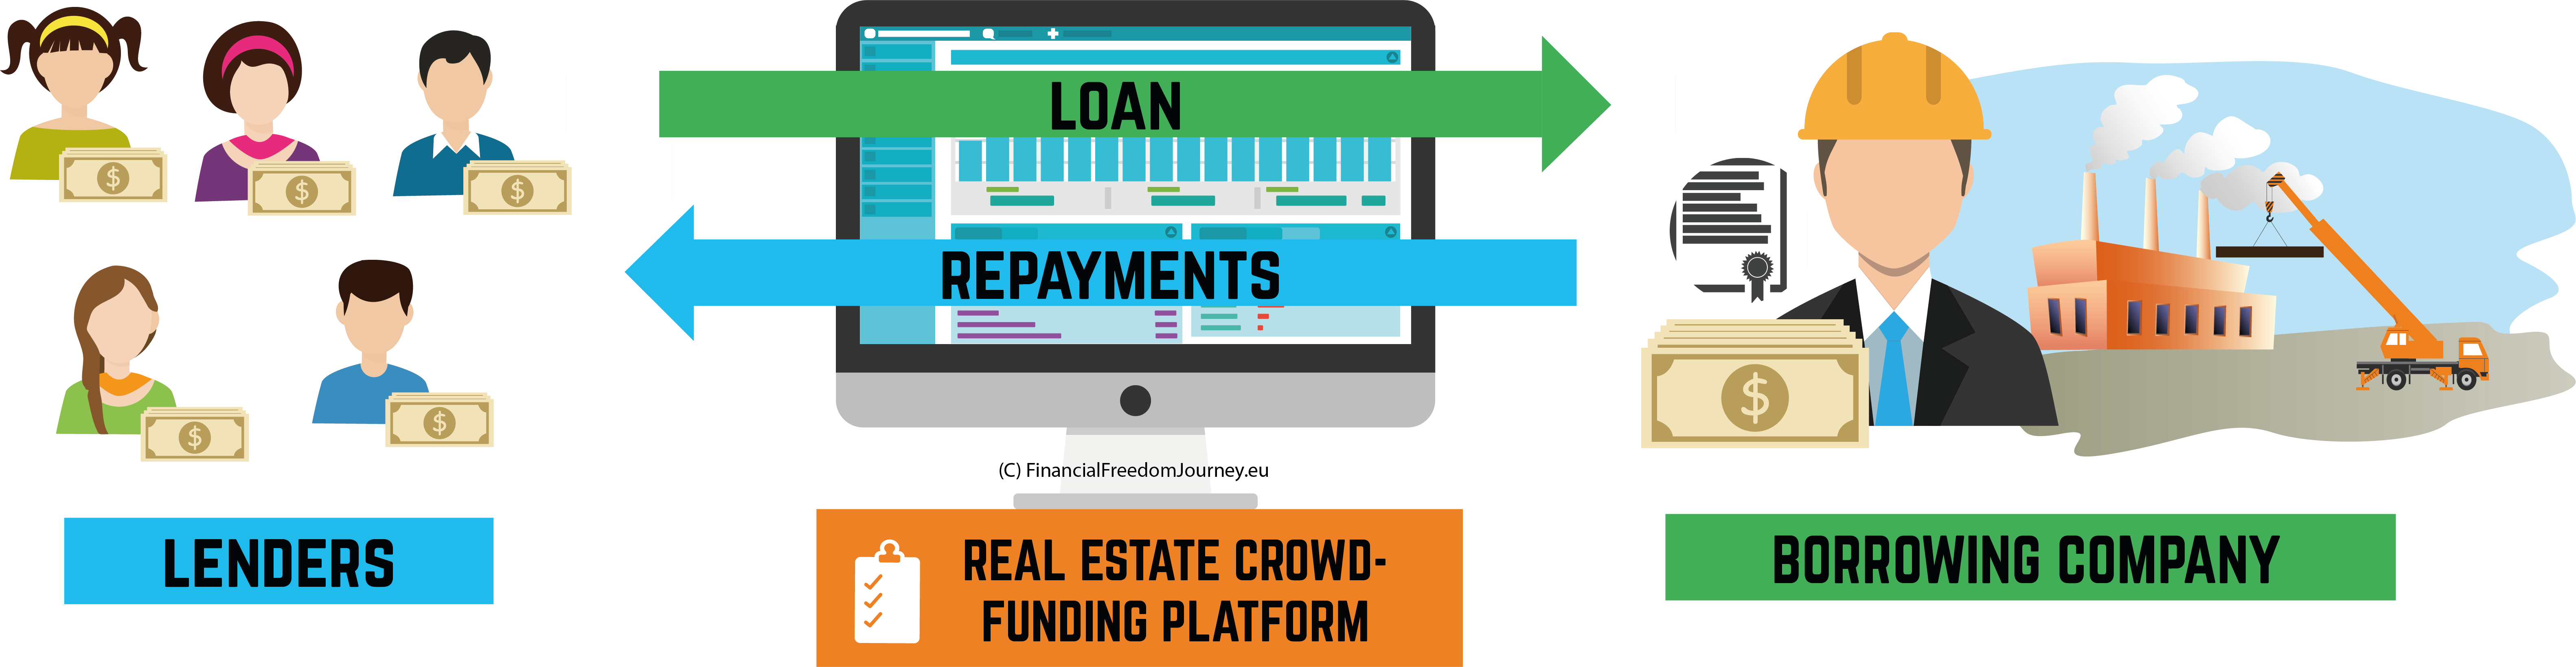 Real Estate Crowdfunding Explained